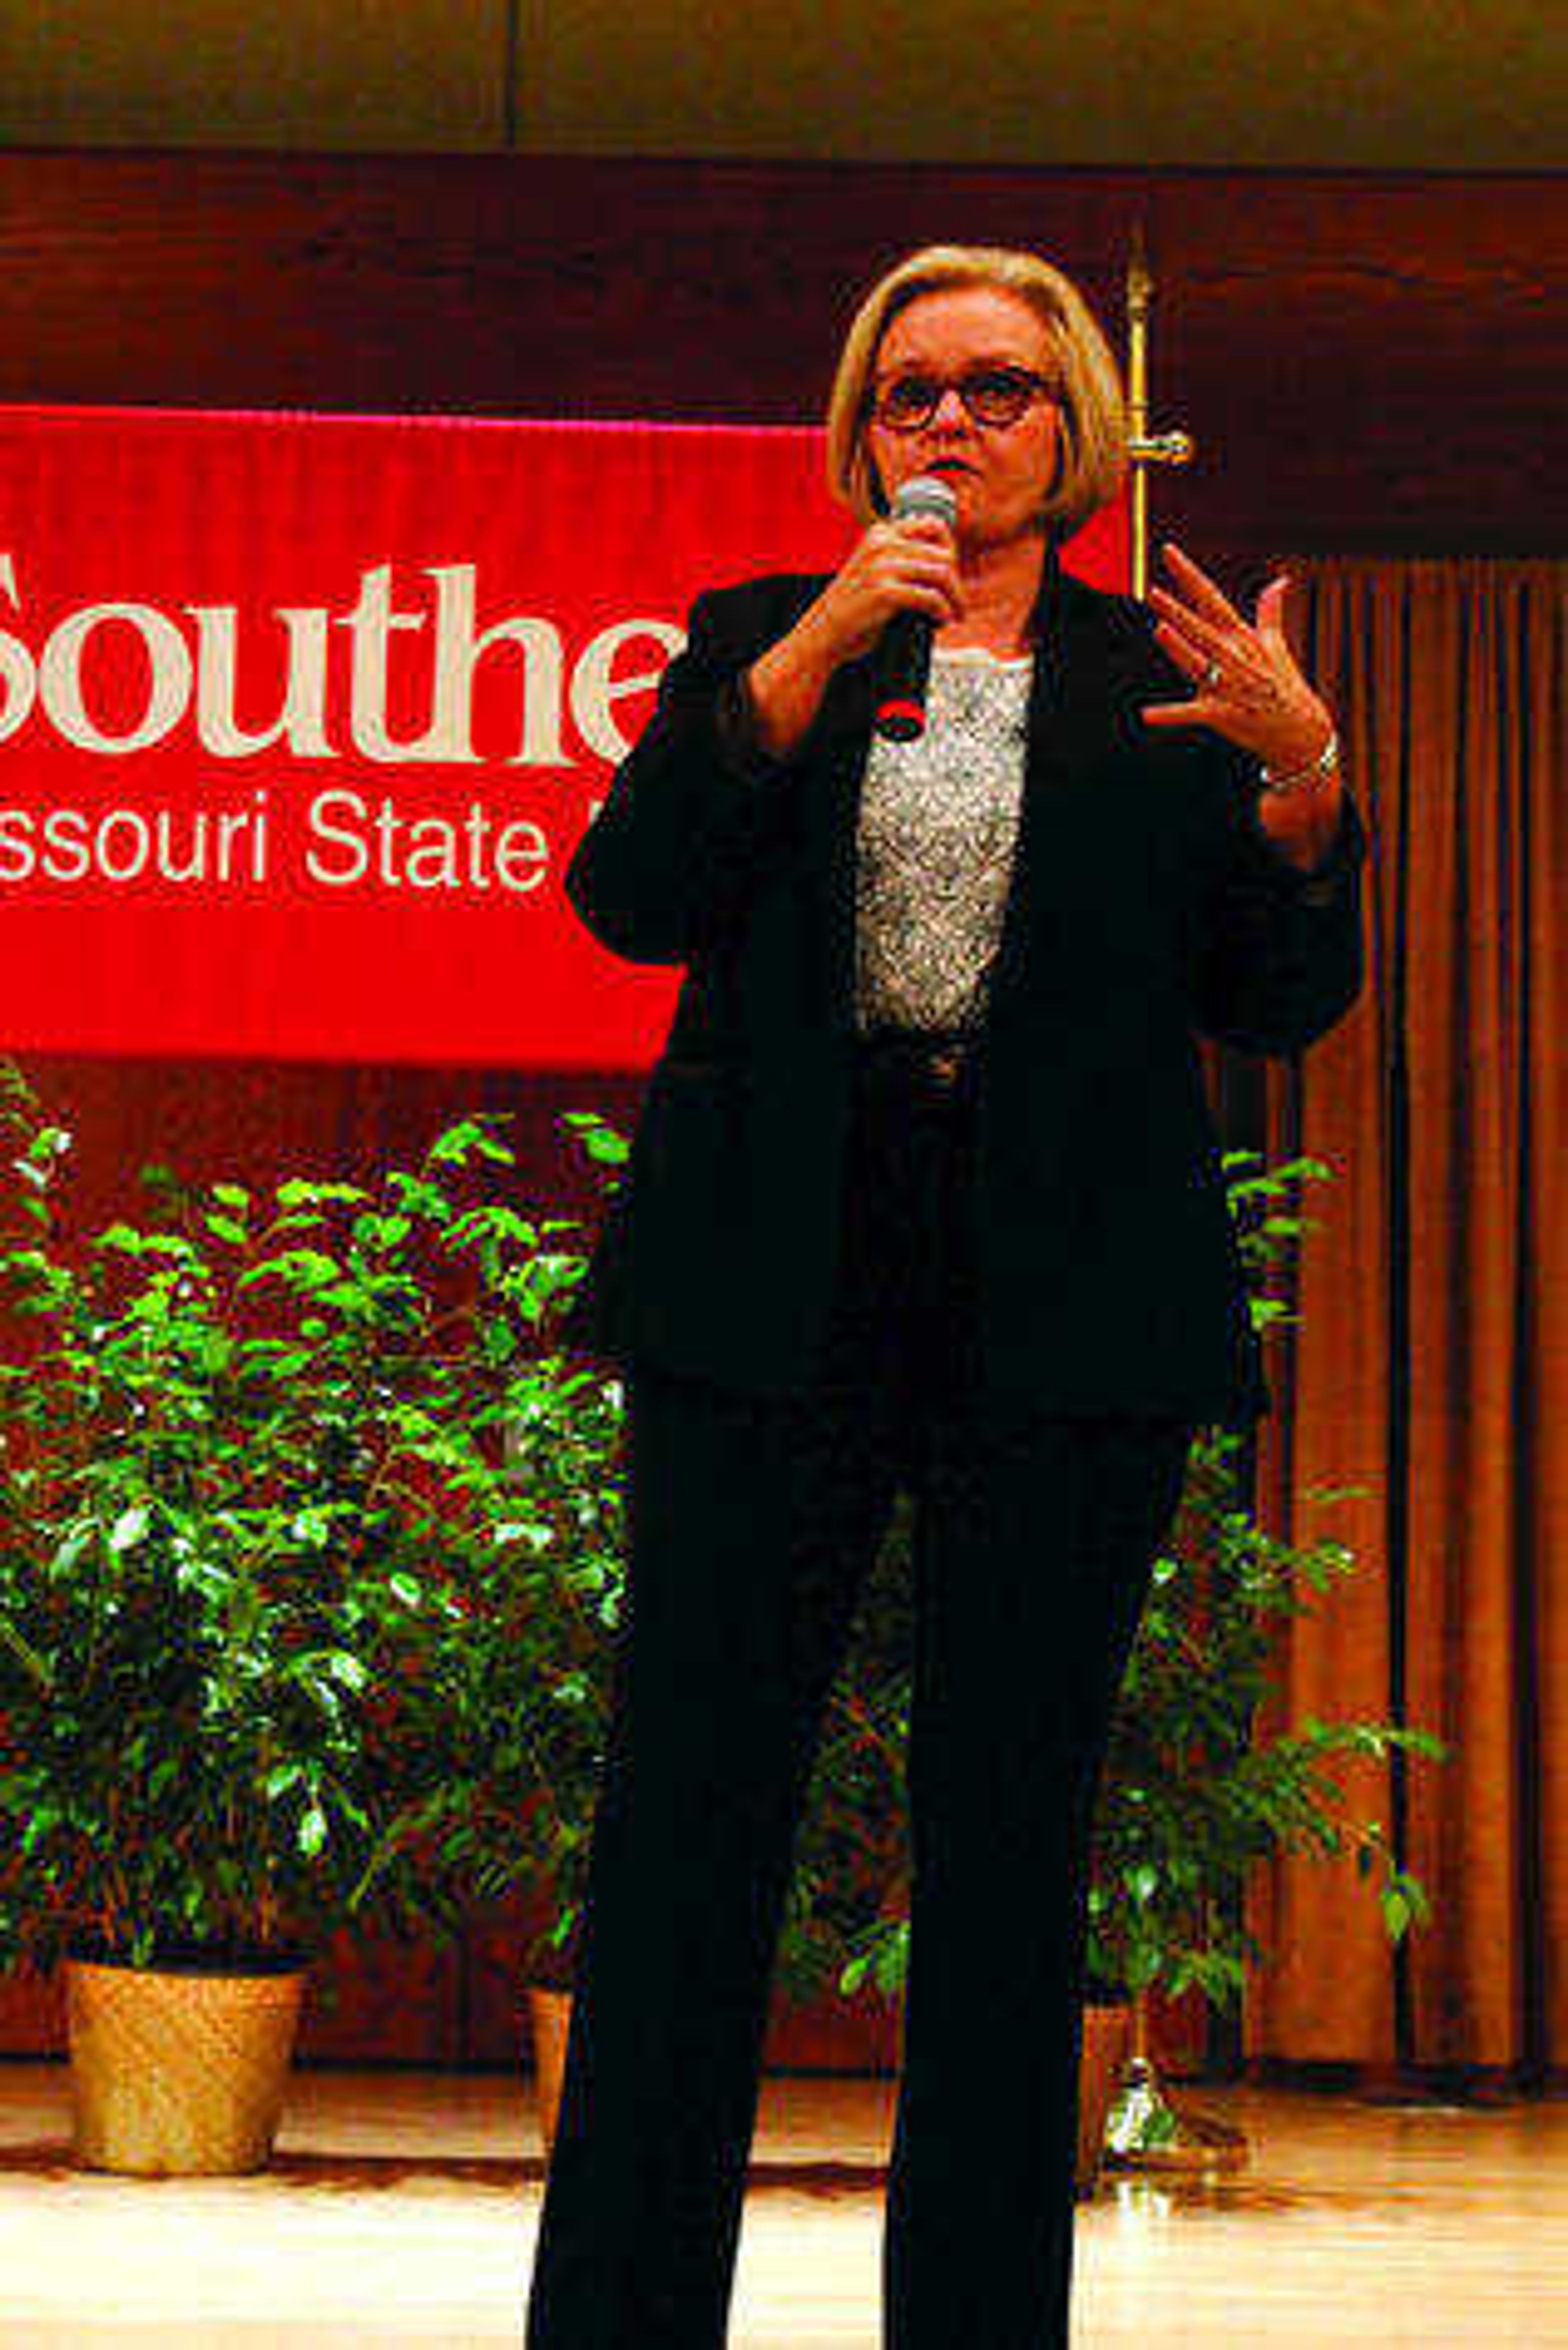 Claire McCaskill visited Southeast Missouri State University on Monday to speak about sexual assault and university policies regarding these incidents. McCaskill is visiting many campuses throughout Missouri to talk about their policies and what needs to be done to effect change. Photo by Zarah Laurence